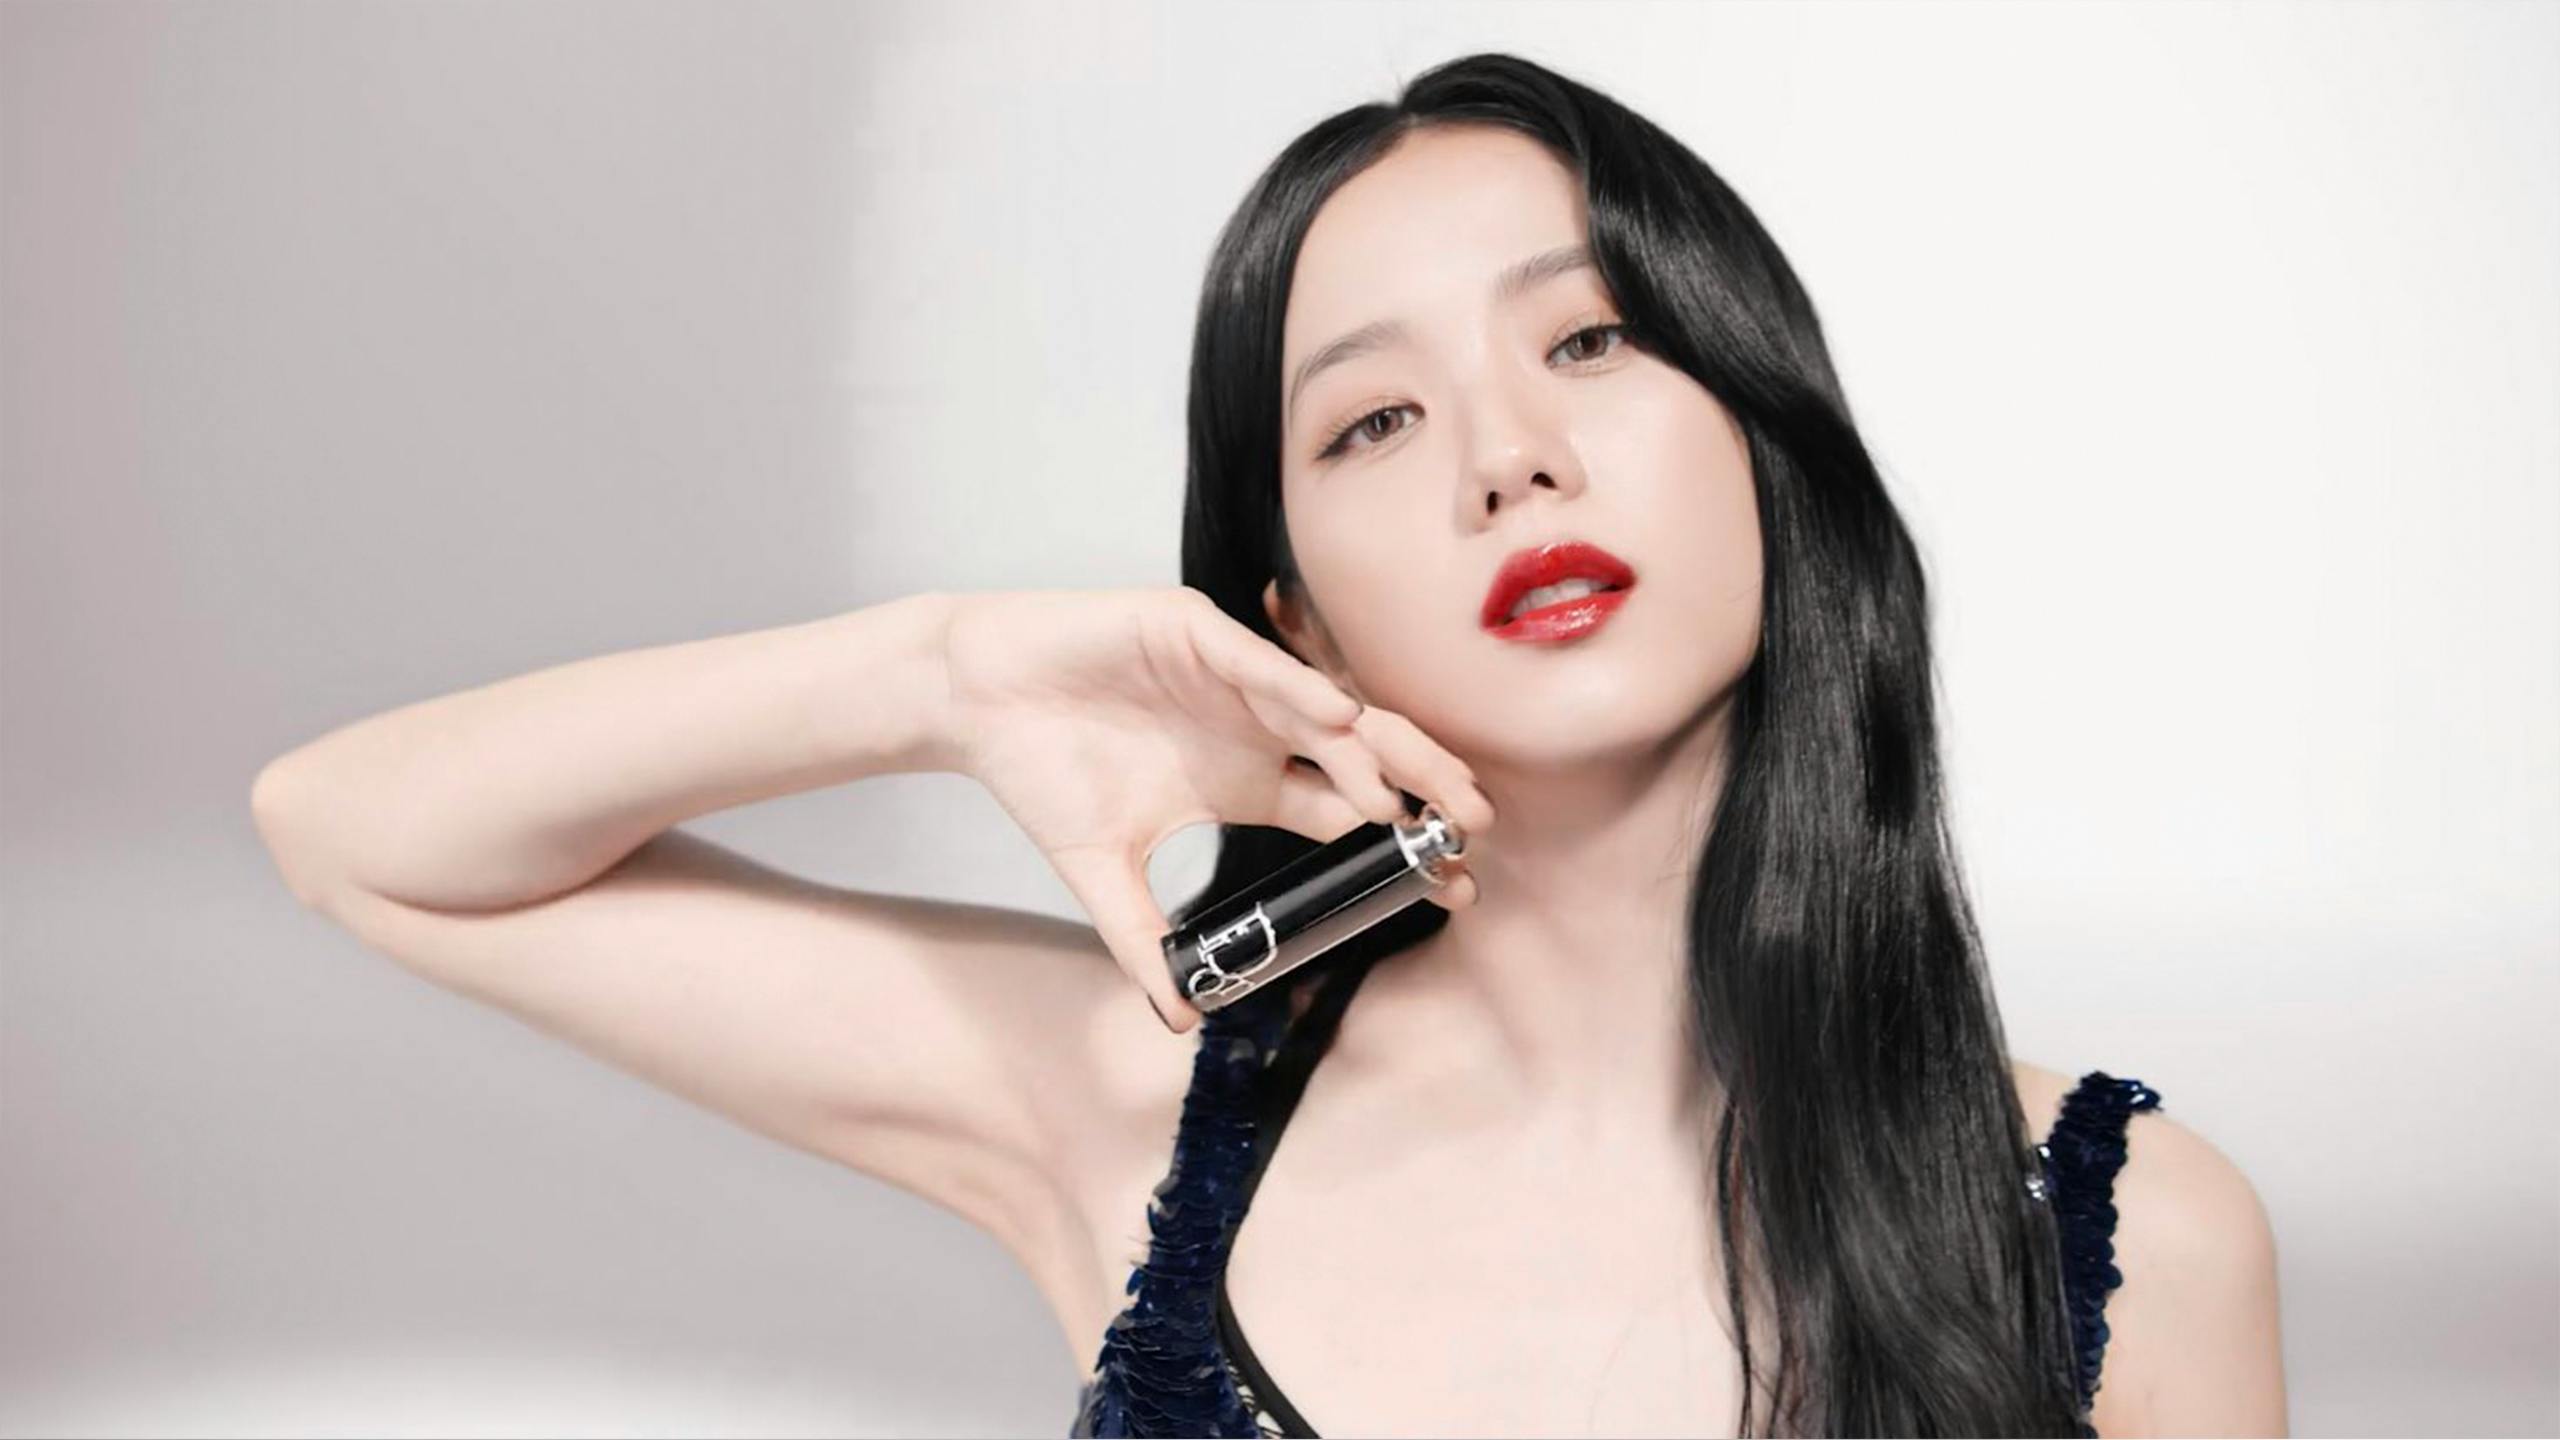 The new Dior Addict lipstick by Dior Beauty